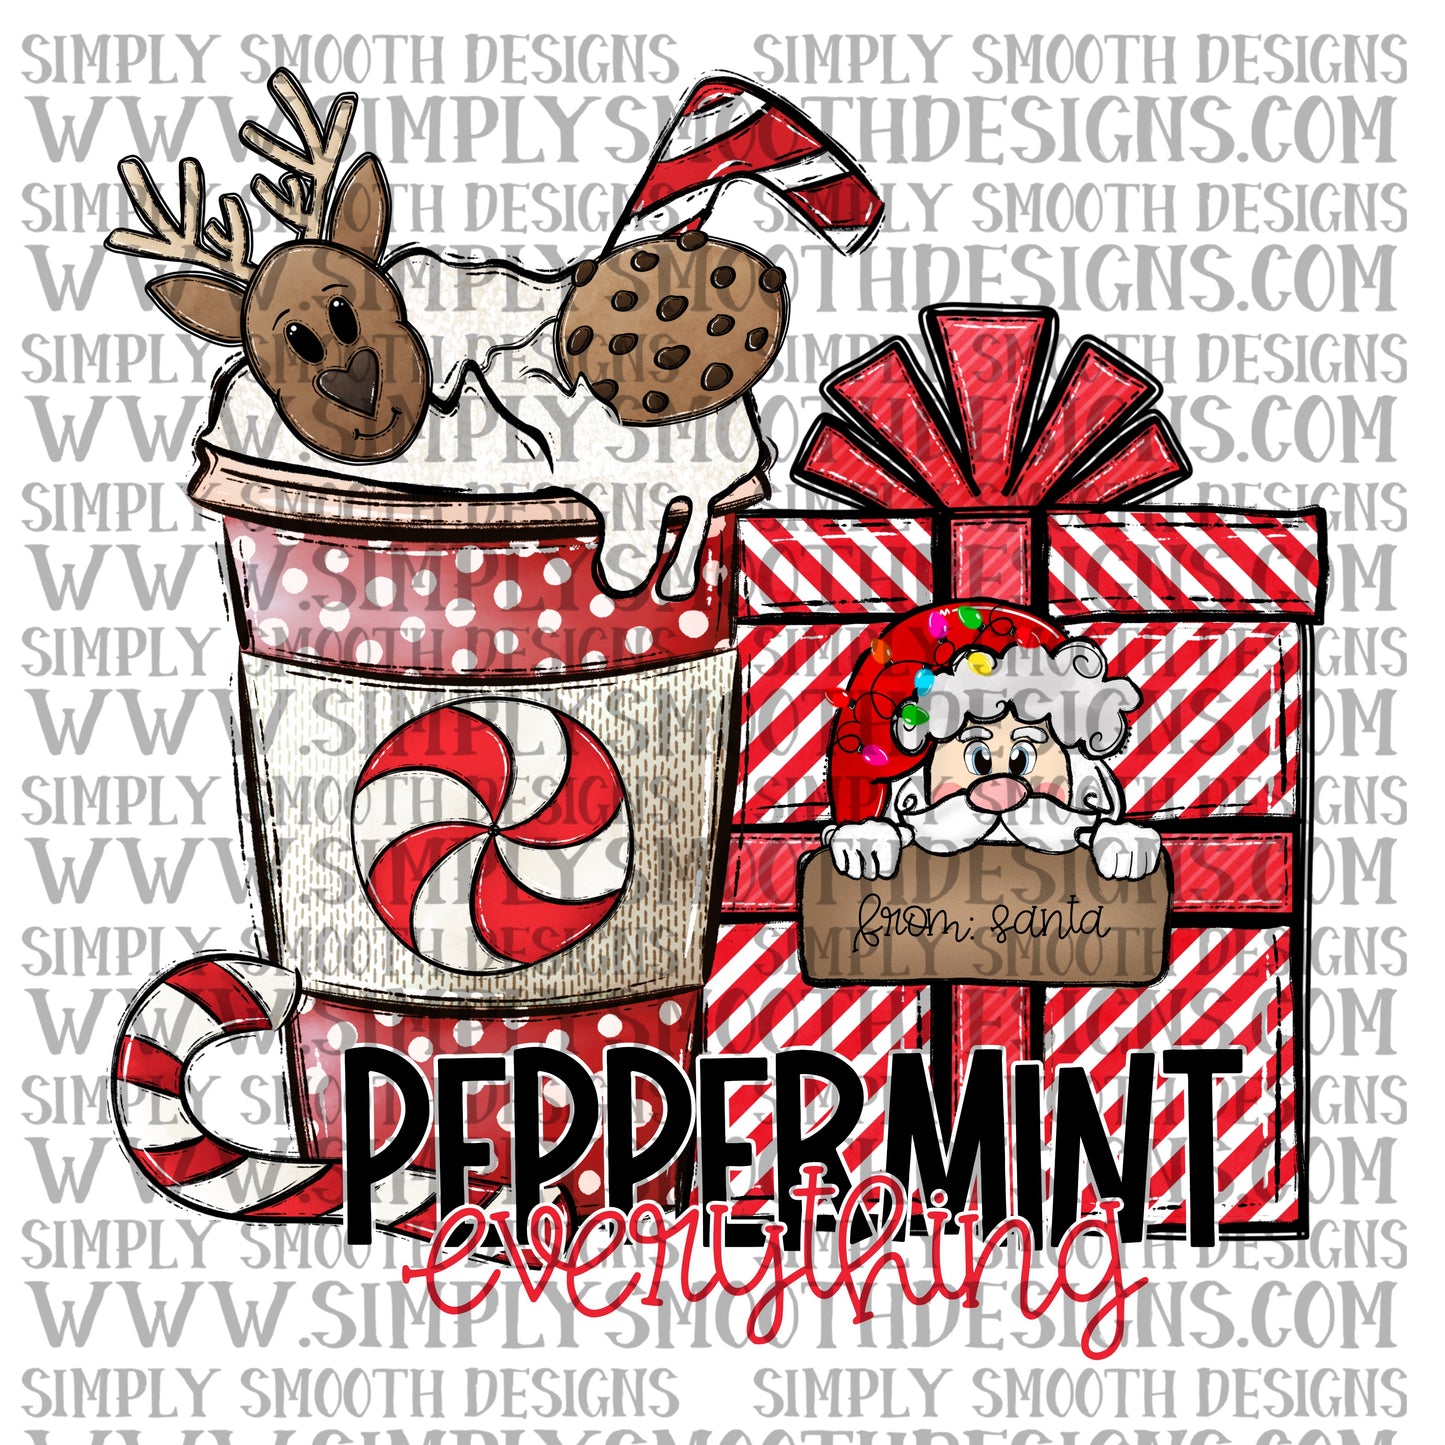 Peppermint everything